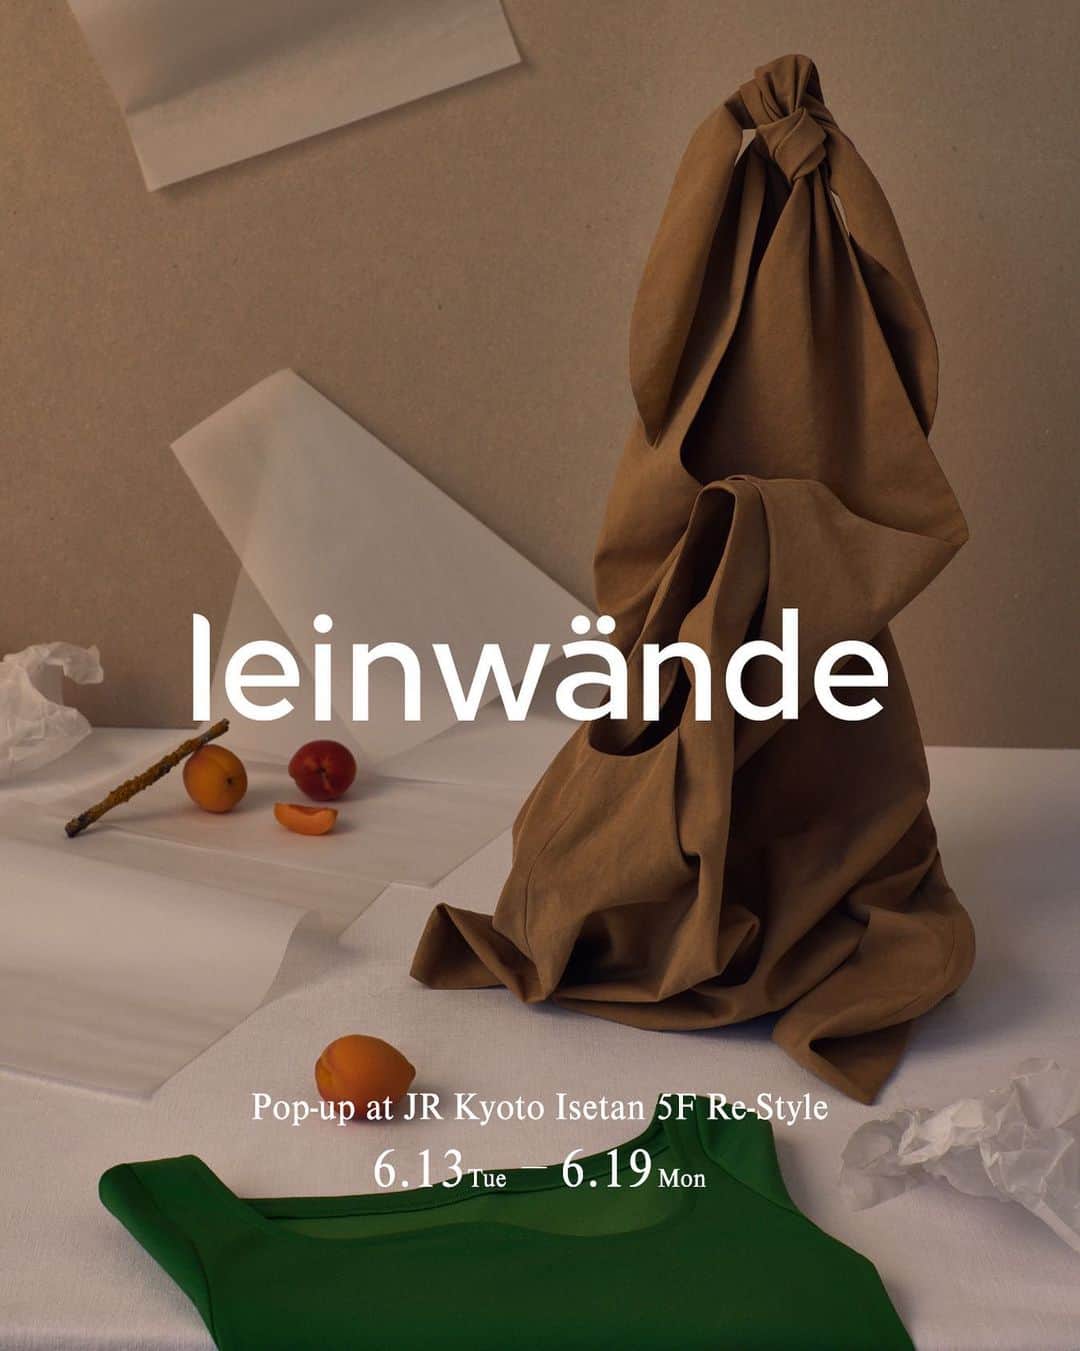 leinwande_officialさんのインスタグラム写真 - (leinwande_officialInstagram)「ㅤㅤㅤㅤㅤㅤㅤㅤㅤㅤㅤㅤㅤ Pop-up at JR Kyoto Isetan［Re-Style］ from 6/13~6/19. ㅤㅤㅤㅤㅤㅤㅤㅤㅤㅤㅤㅤㅤ We will having a pop-up store at JR Kyoto Isetan 5th floor［Re-Style］ from 13th to 19th June. You will be able to see our 23pre fall collection. We are looking forward to you visiting. ㅤㅤㅤㅤㅤㅤㅤㅤㅤㅤㅤㅤㅤ 6/13(火)-6/19(月)まで、JR京都伊勢丹5F［Re-Style］にてPop-up storeを開催いたします。 leinwändeの23pre fall新作コレクションを実際にお手に取ってご覧いただく、特別な機会となります。 皆さまのご来店を心よりお待ちいたしております。 ㅤㅤㅤㅤㅤㅤㅤㅤㅤㅤㅤㅤㅤ #leinwände #leinwande」6月9日 19時52分 - leinwande_official